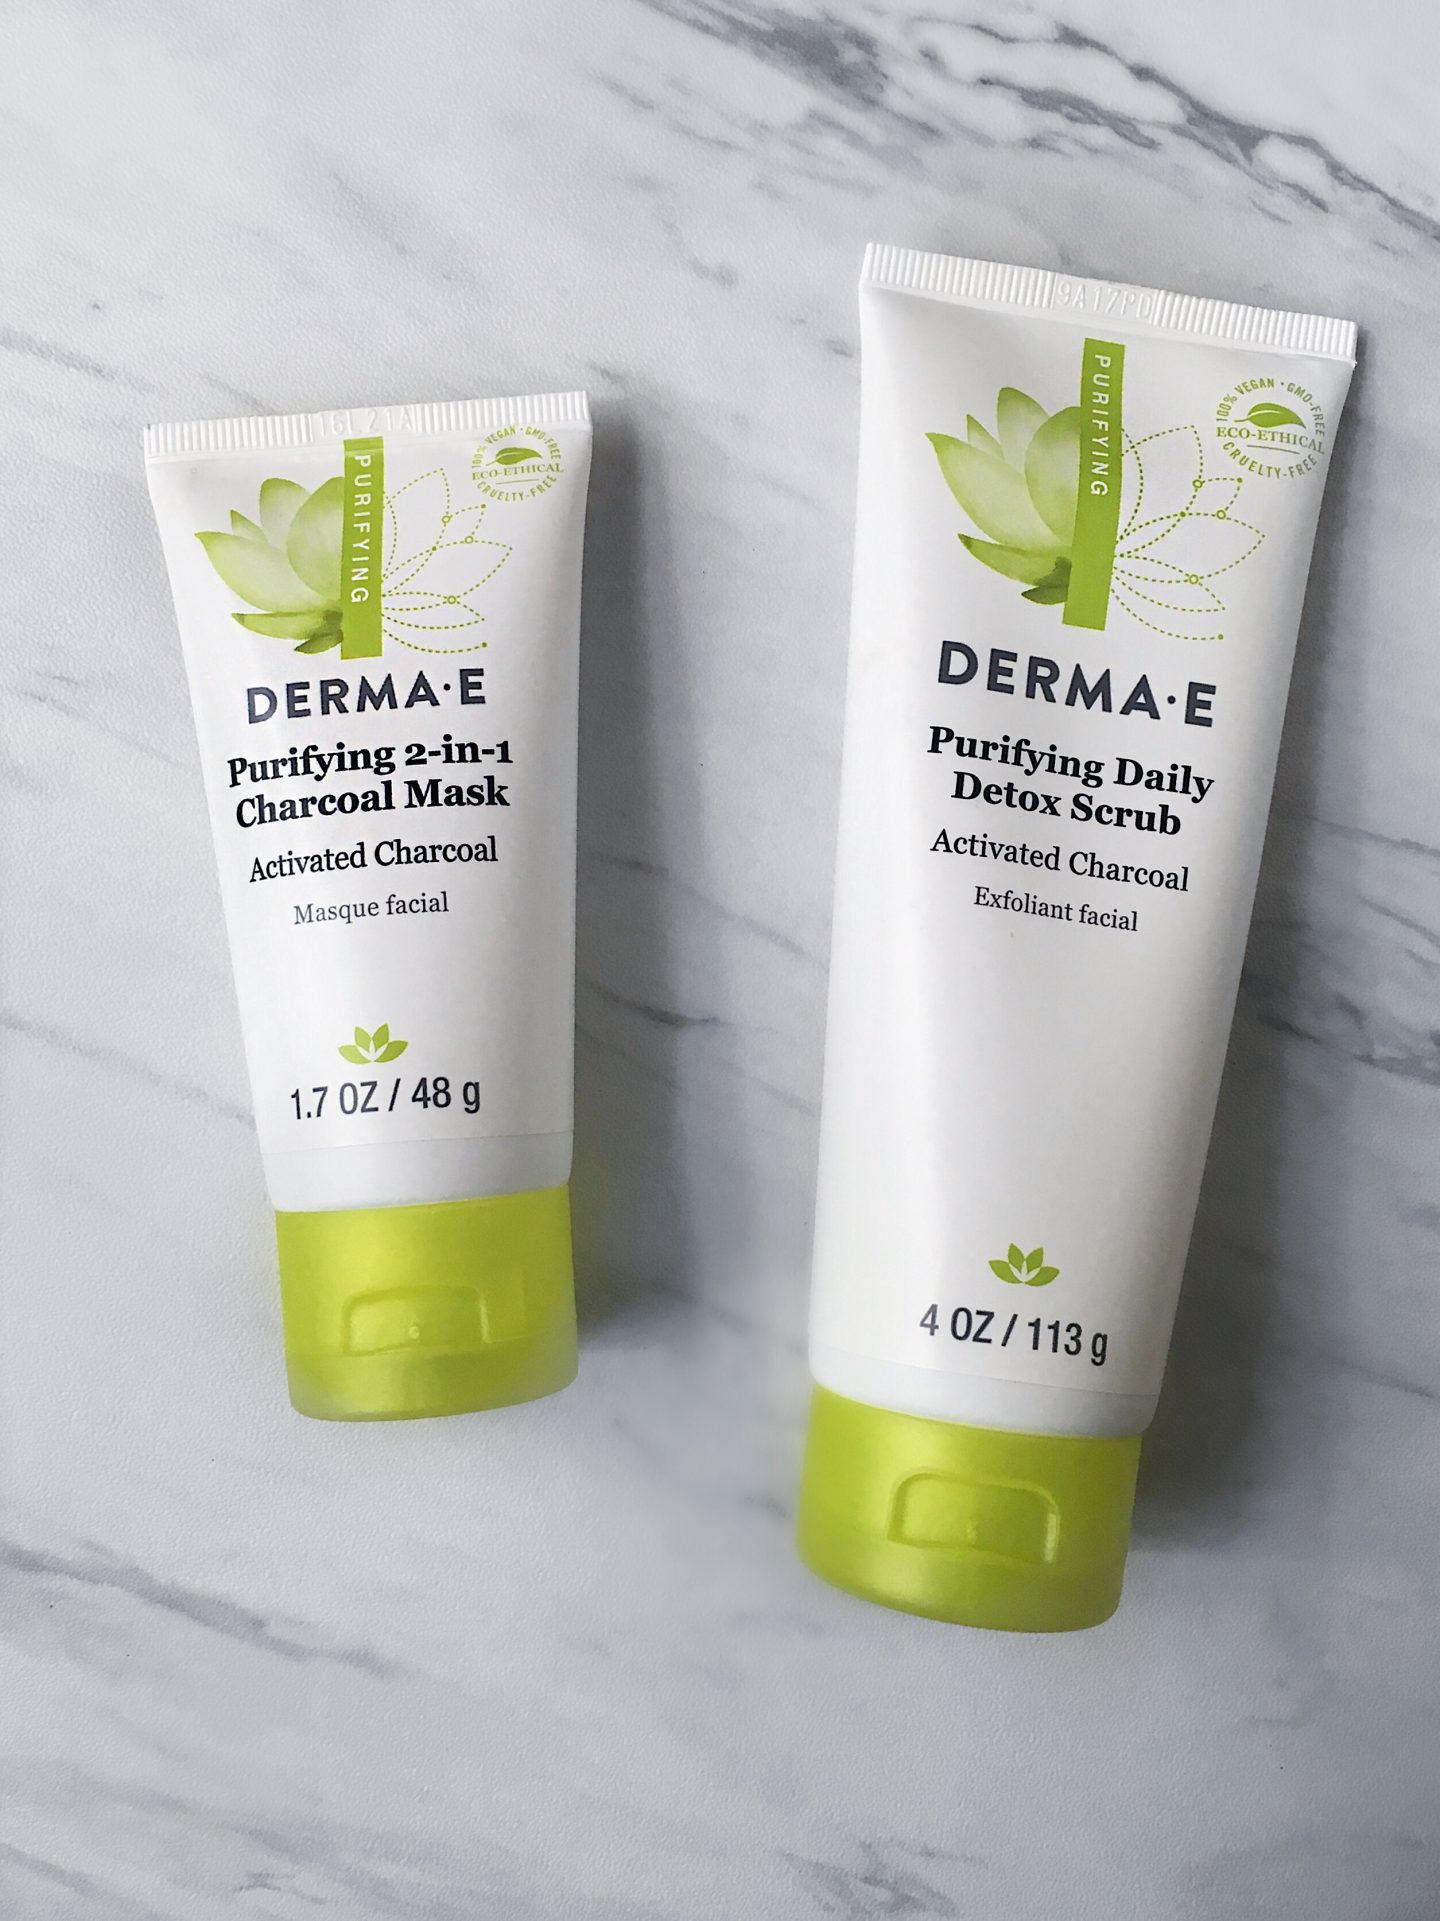 Trying Aloe & Charcoal Skincare | DERMA-E Review